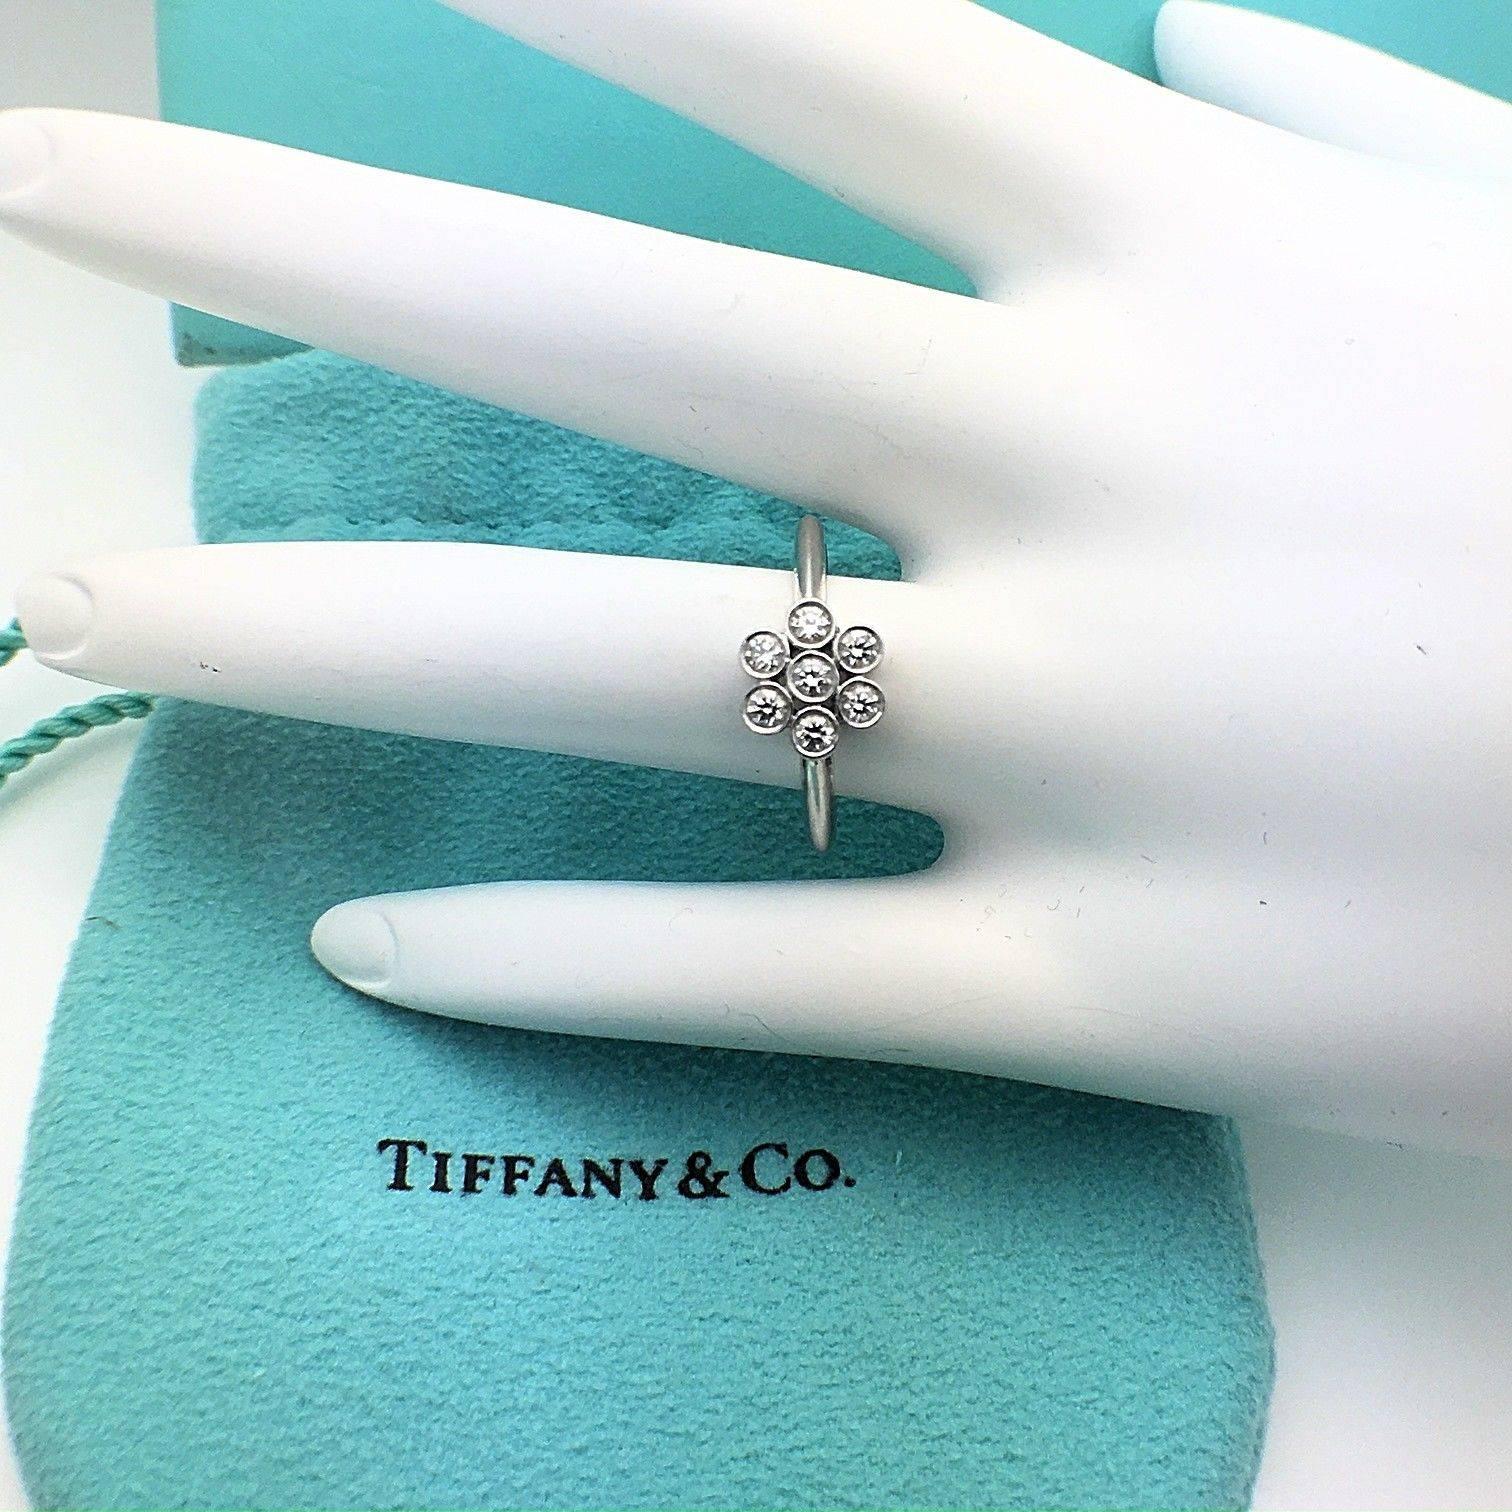 Tiffany & Co. Round Brilliant 0.30 Carat F VVS Diamond Flower Ring in Platinum In Excellent Condition For Sale In San Diego, CA